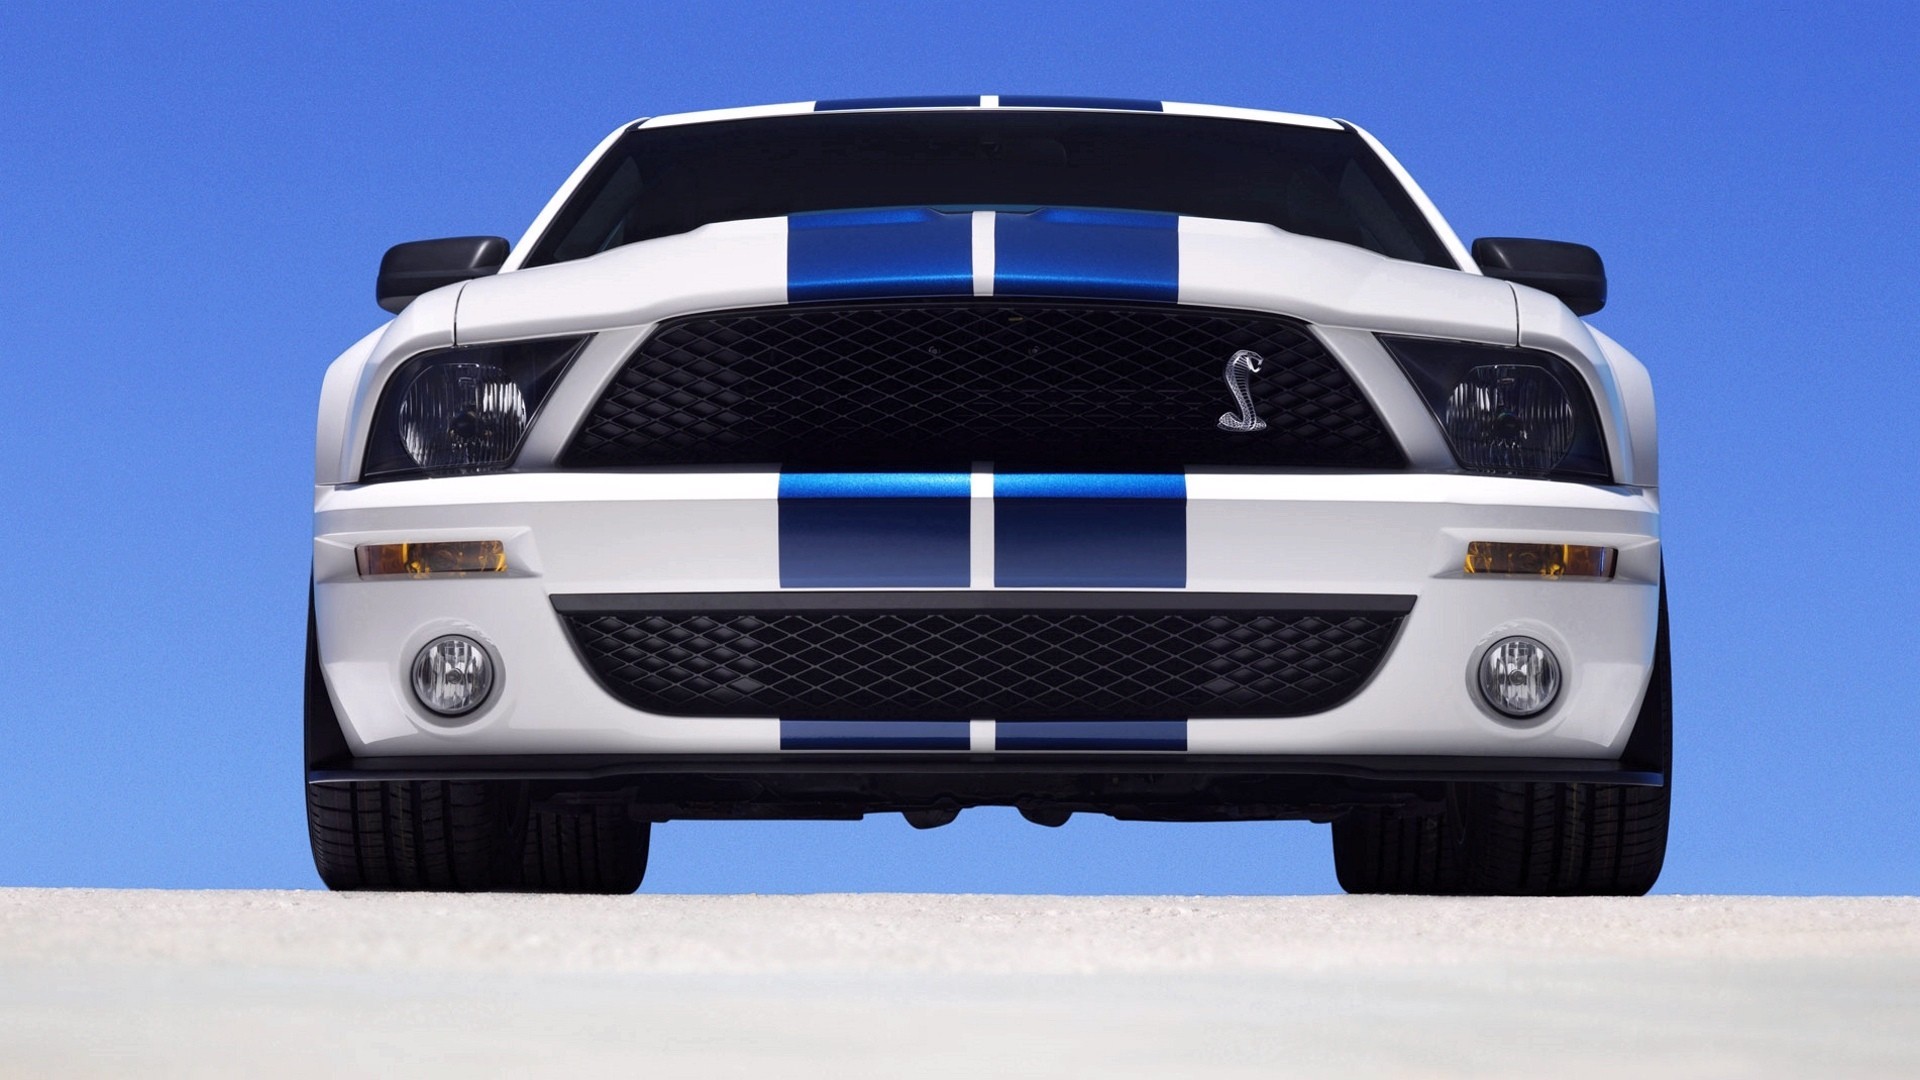 Ford Mustang, Muscle Cars Wallpaper